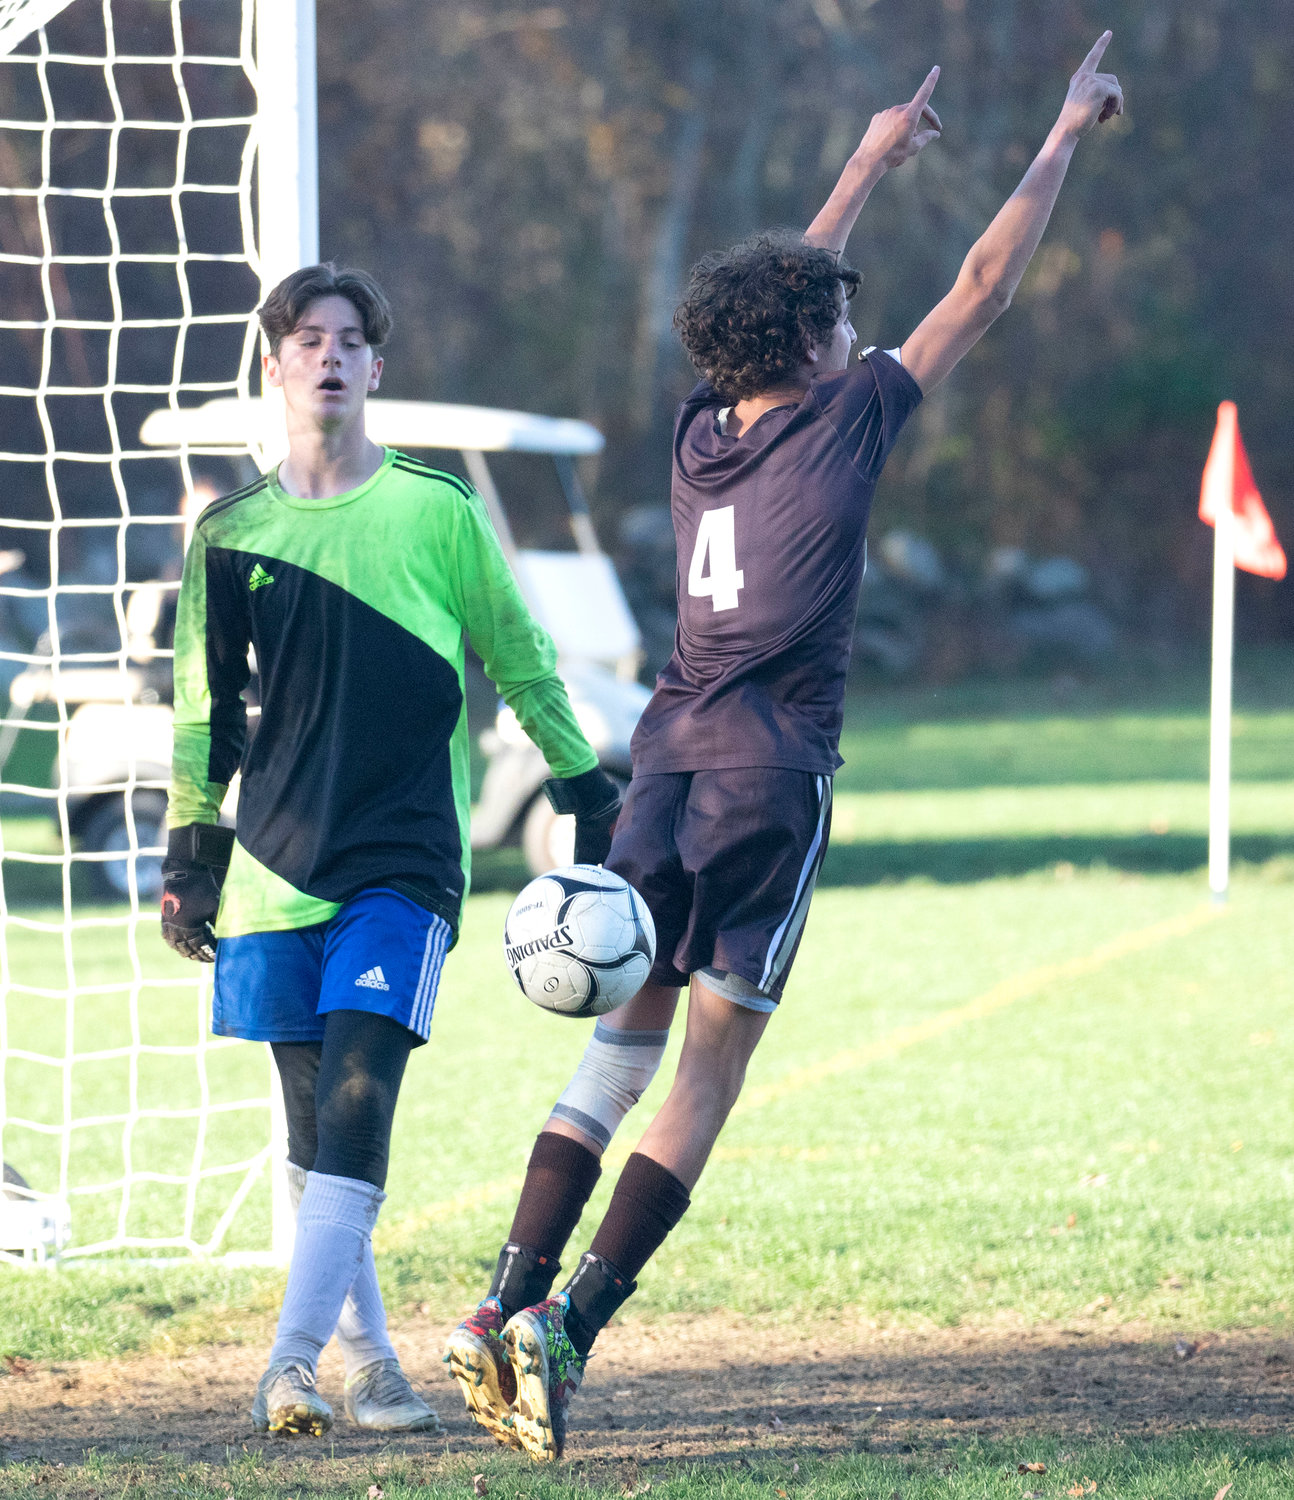 Midfielder Ben Boudria (right) signals a goal after Antonio Dutra Africano scored on a free kick from midfield to give Westport a 2-0 lead in the second half.